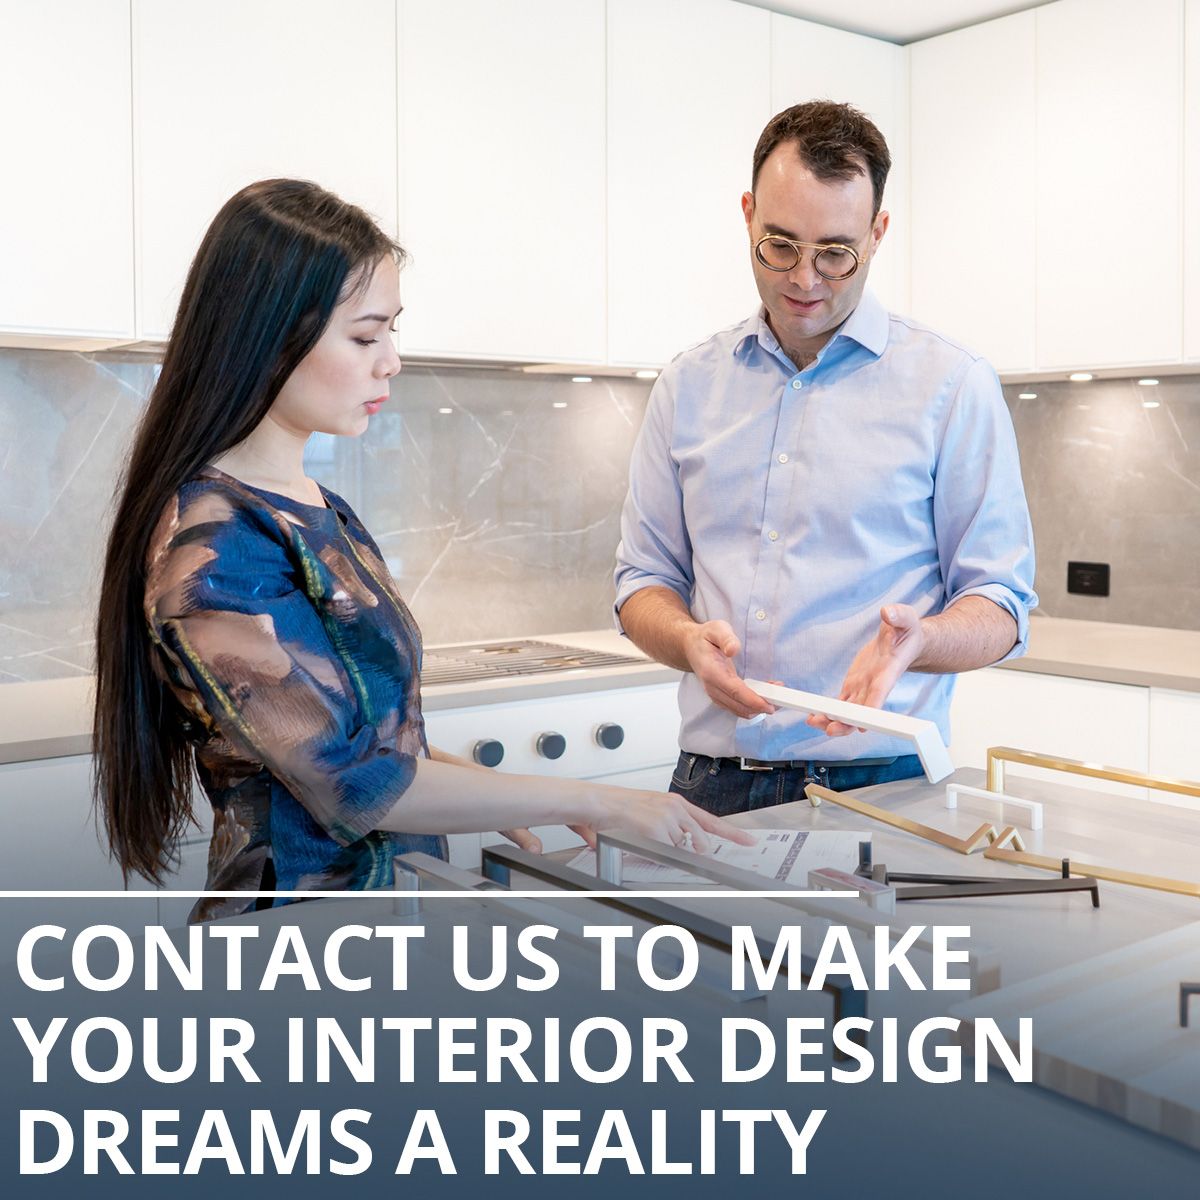 Contact Us to Make Your Interior Design Dreams a Reality